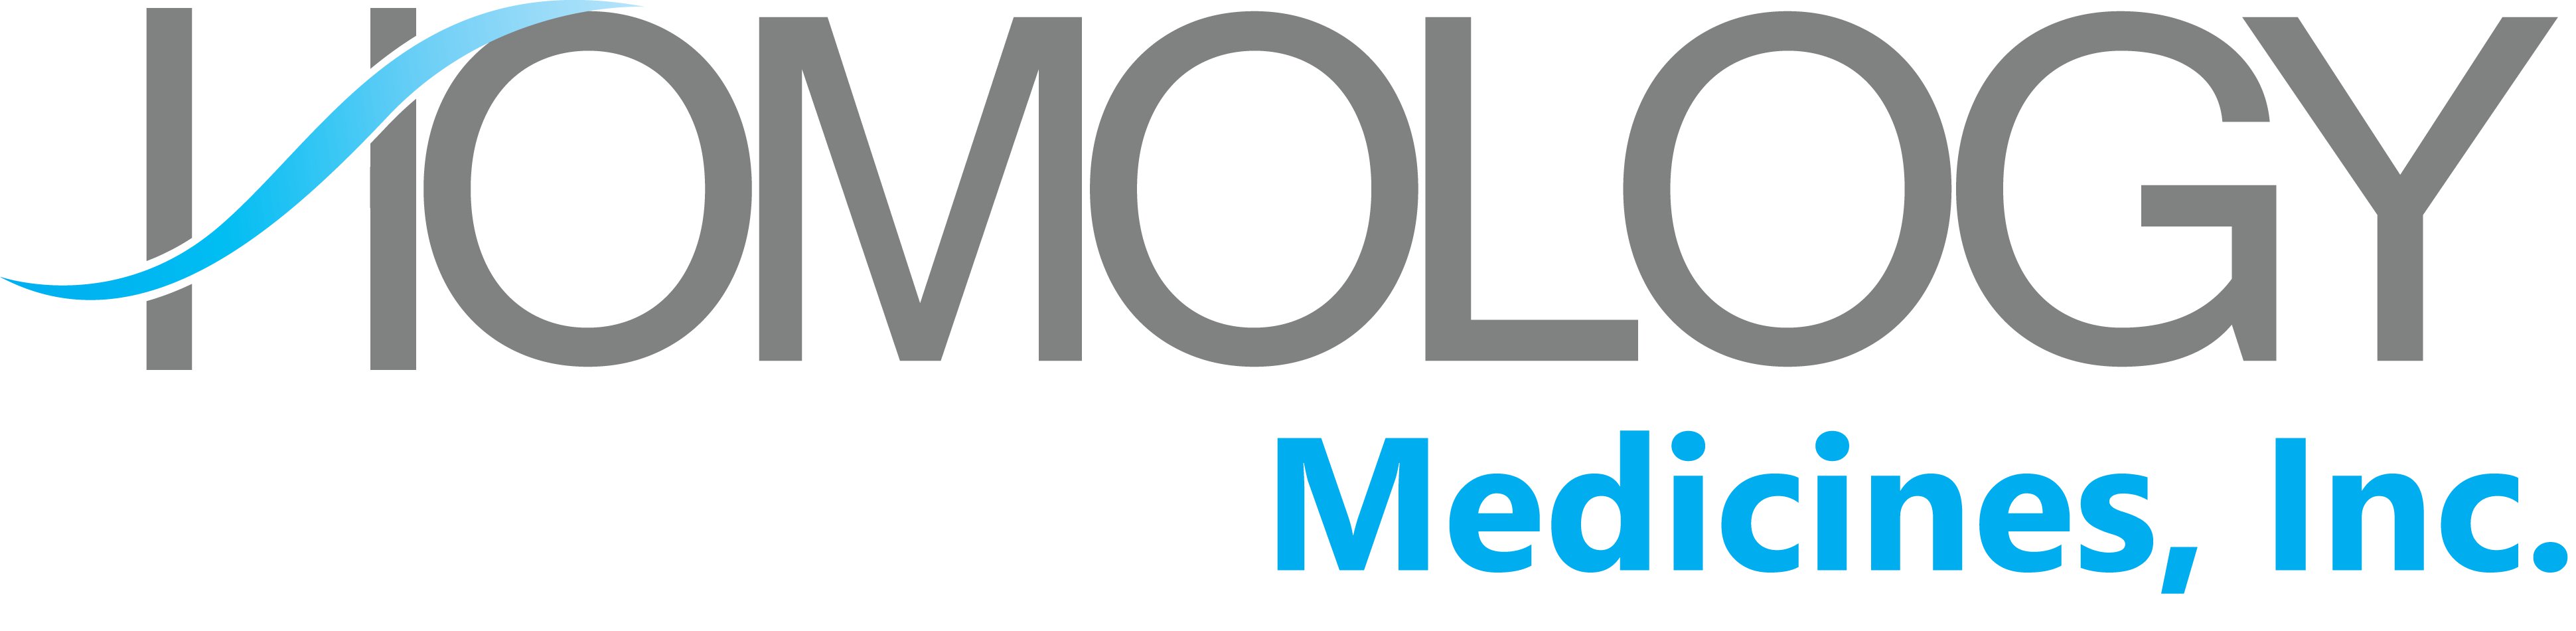 Homology Medicines Presents Preclinical Data Supporting Immunosuppression Regimen in Ongoing PKU and Hunter Syndrome Clinical Trials, and Details Optimized MLD Gene Therapy Candidate at the 19th Annual WORLDSymposium™ Meeting